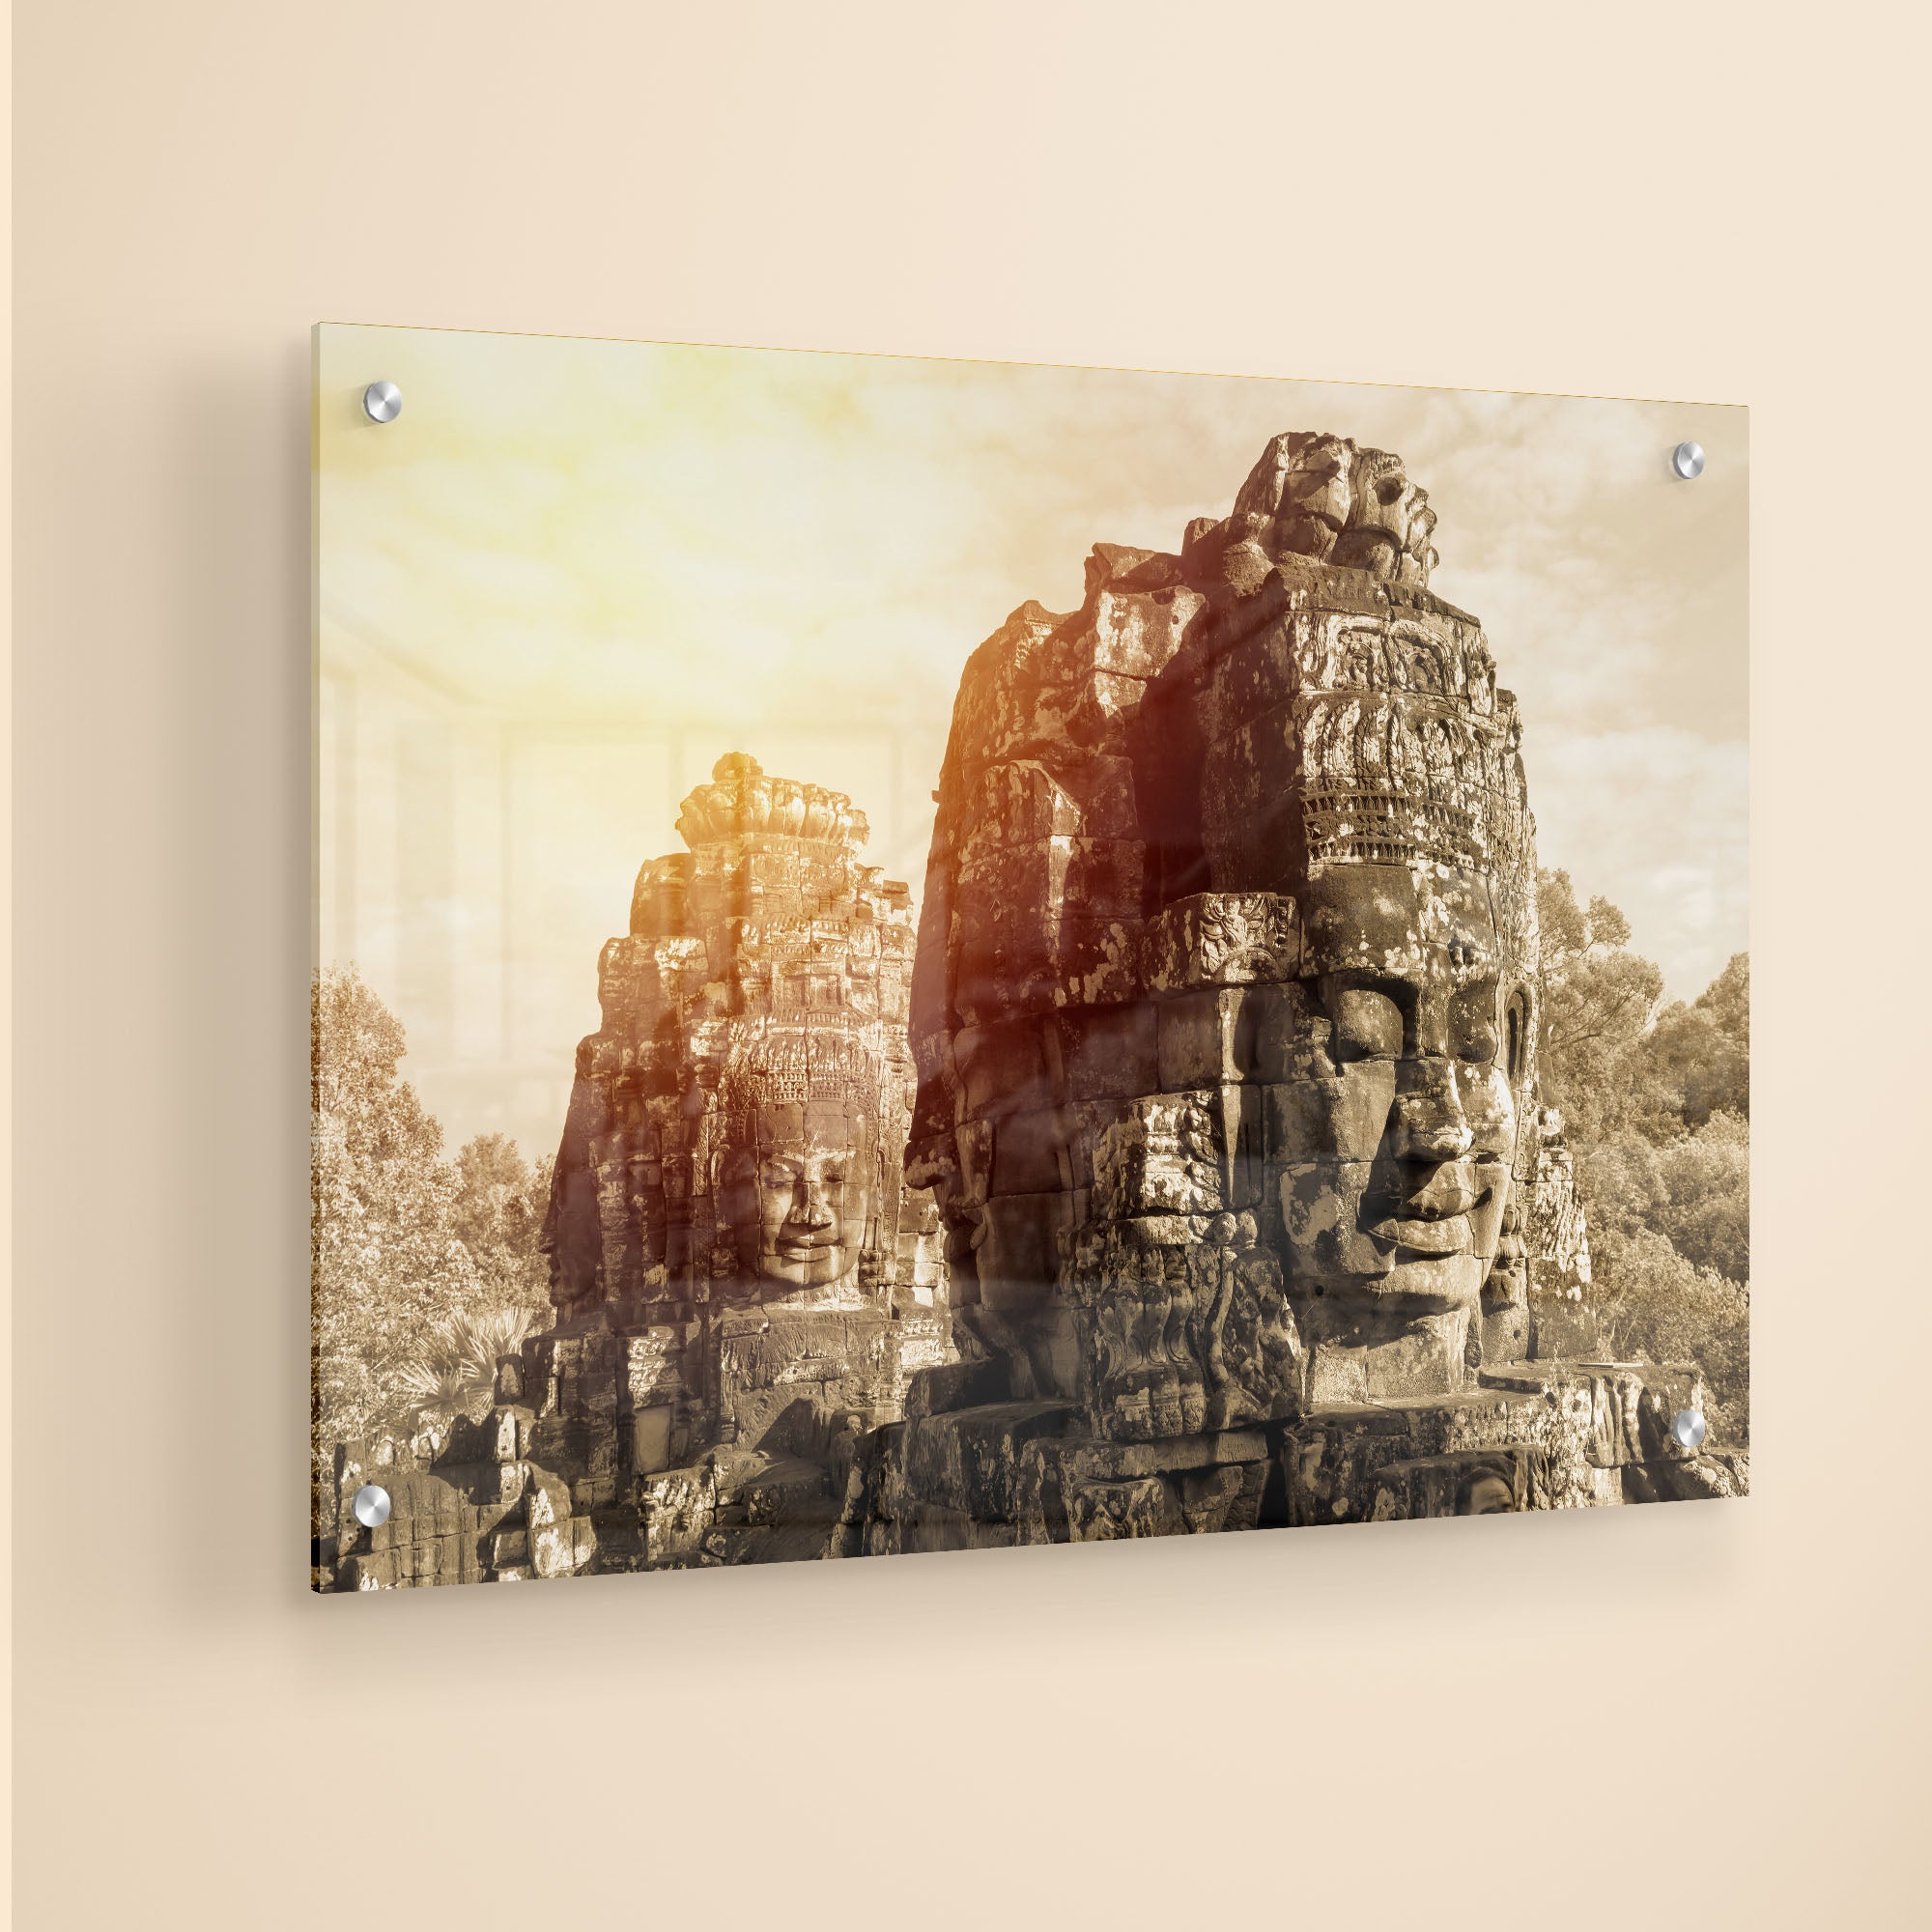 Faces Of Bayon Temple Acrylic Wall Painting